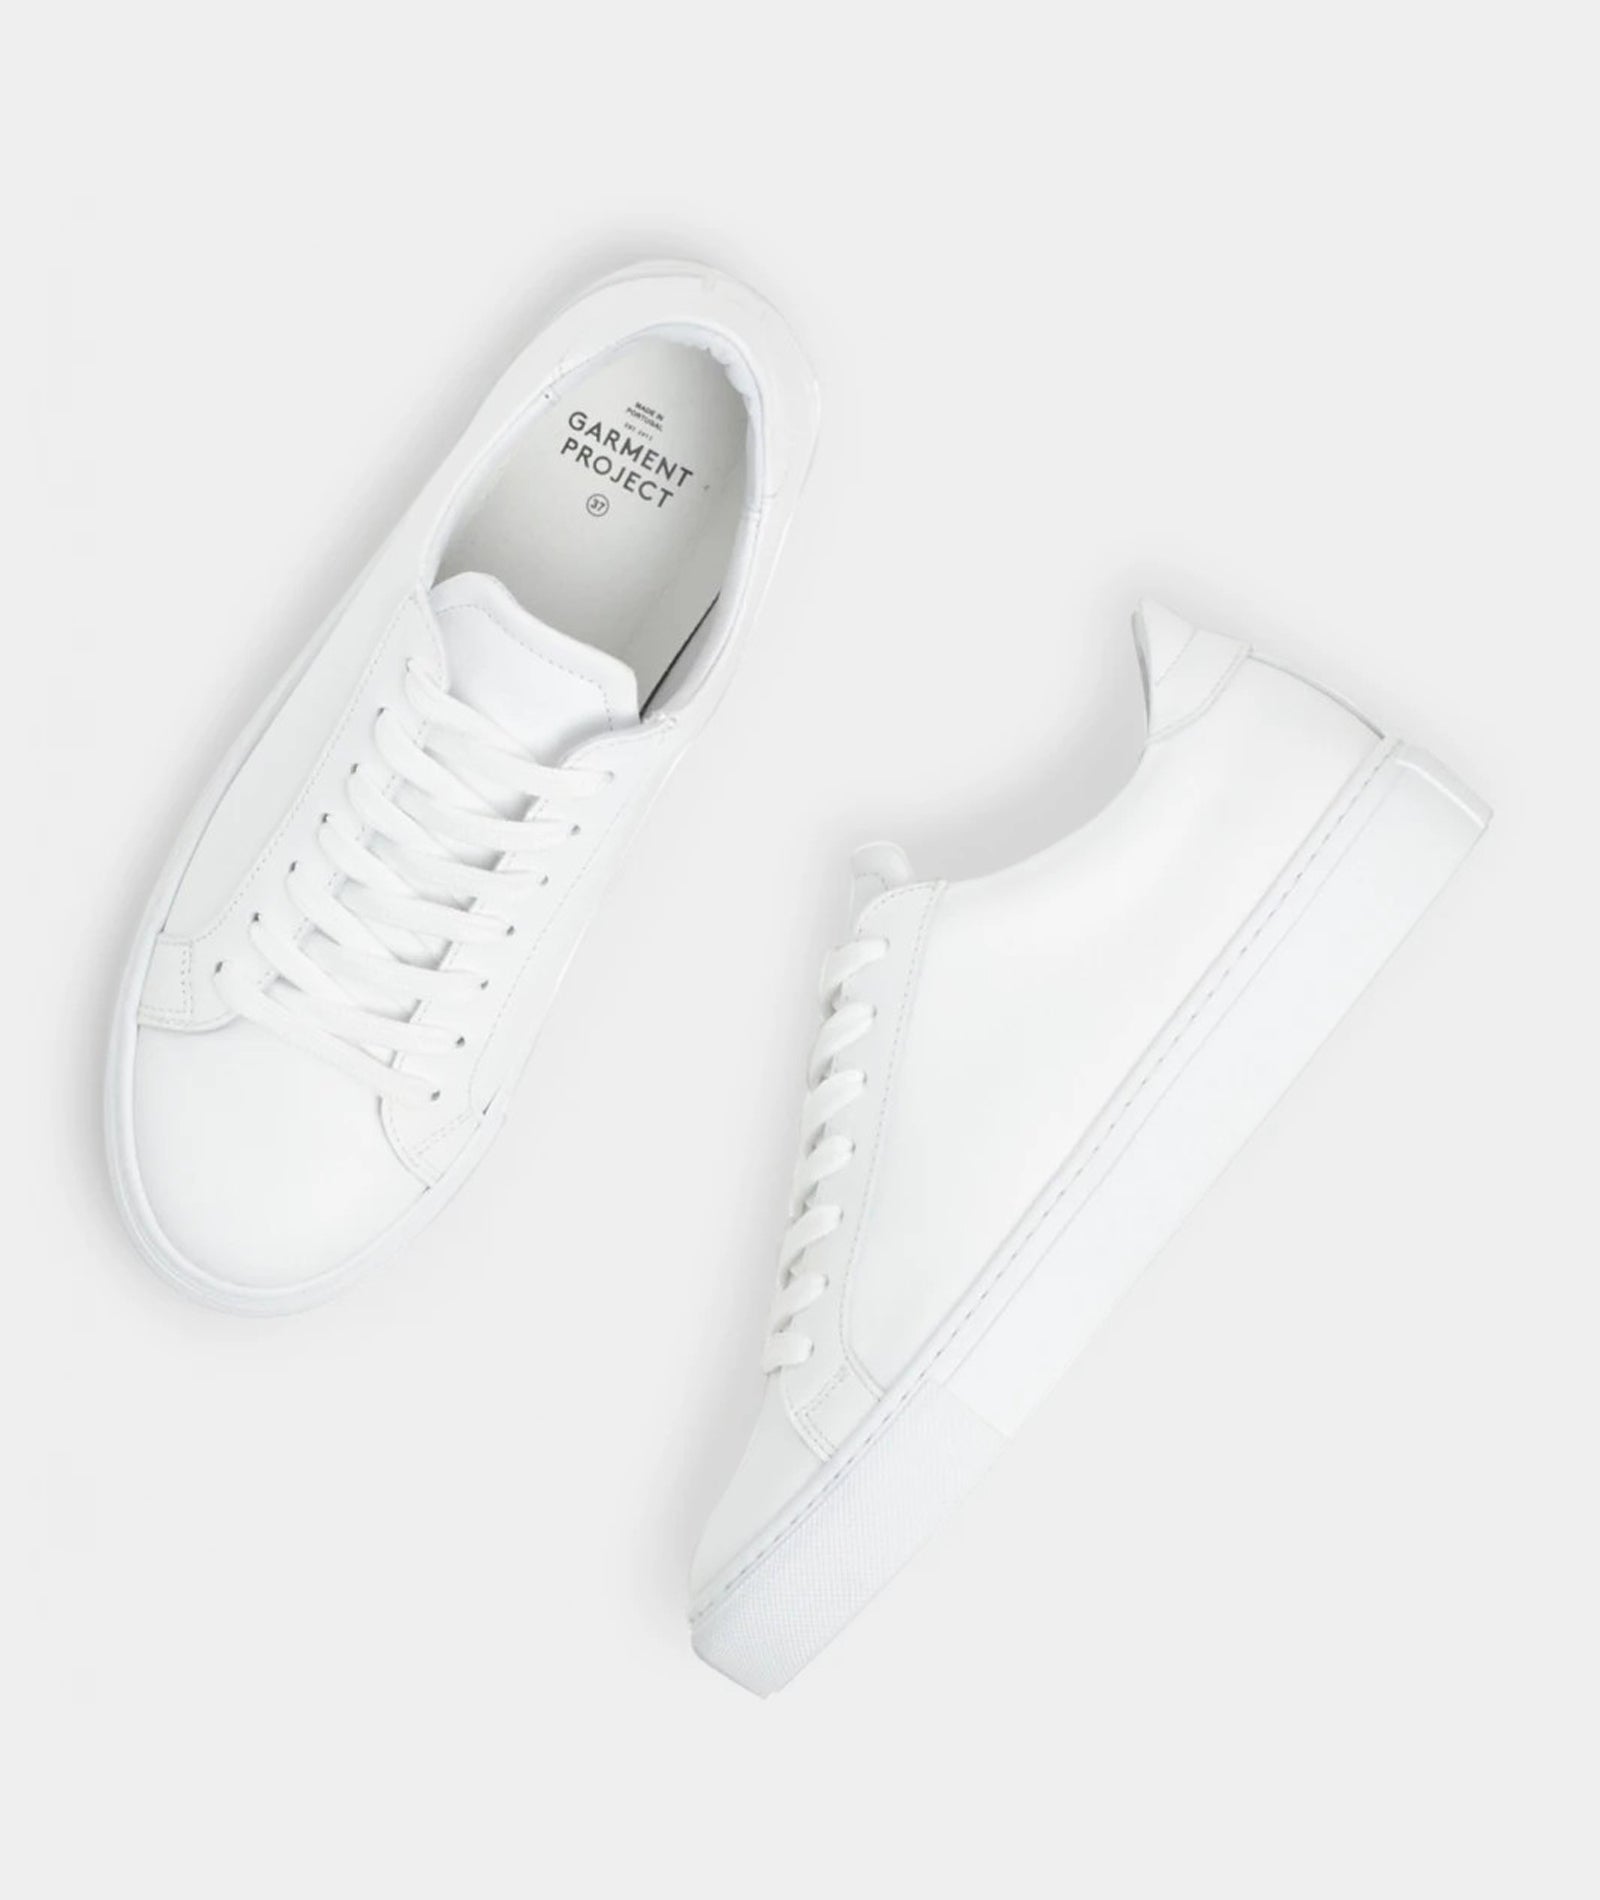 What are some good brands of women's white leather sneakers? - Quora